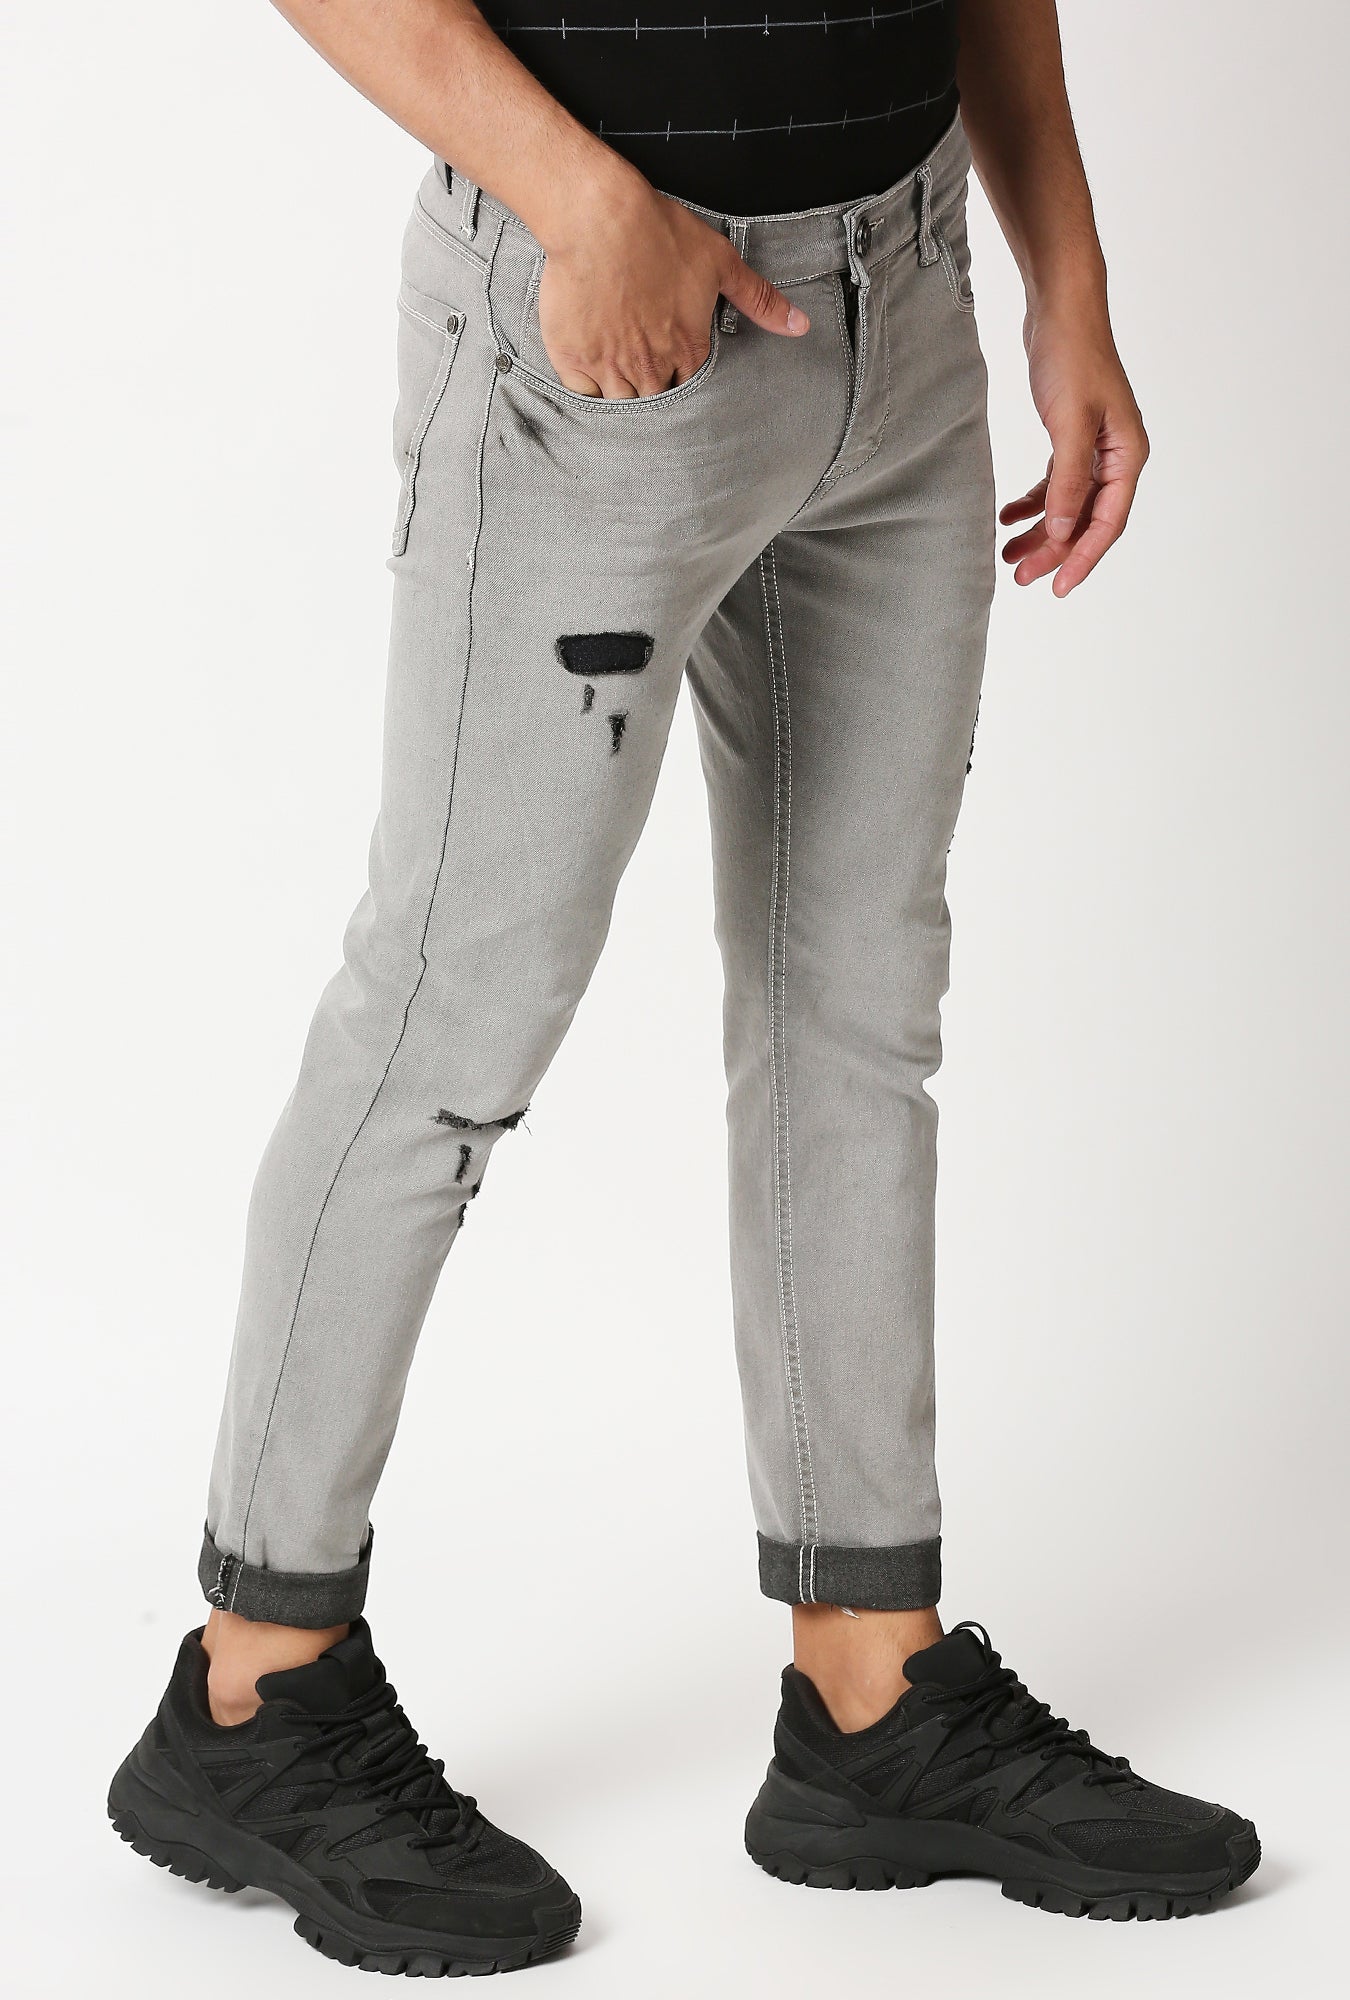 Fostino Distress And Repair Stretch Skinny Jeans In Grey - Fostino - Jeans